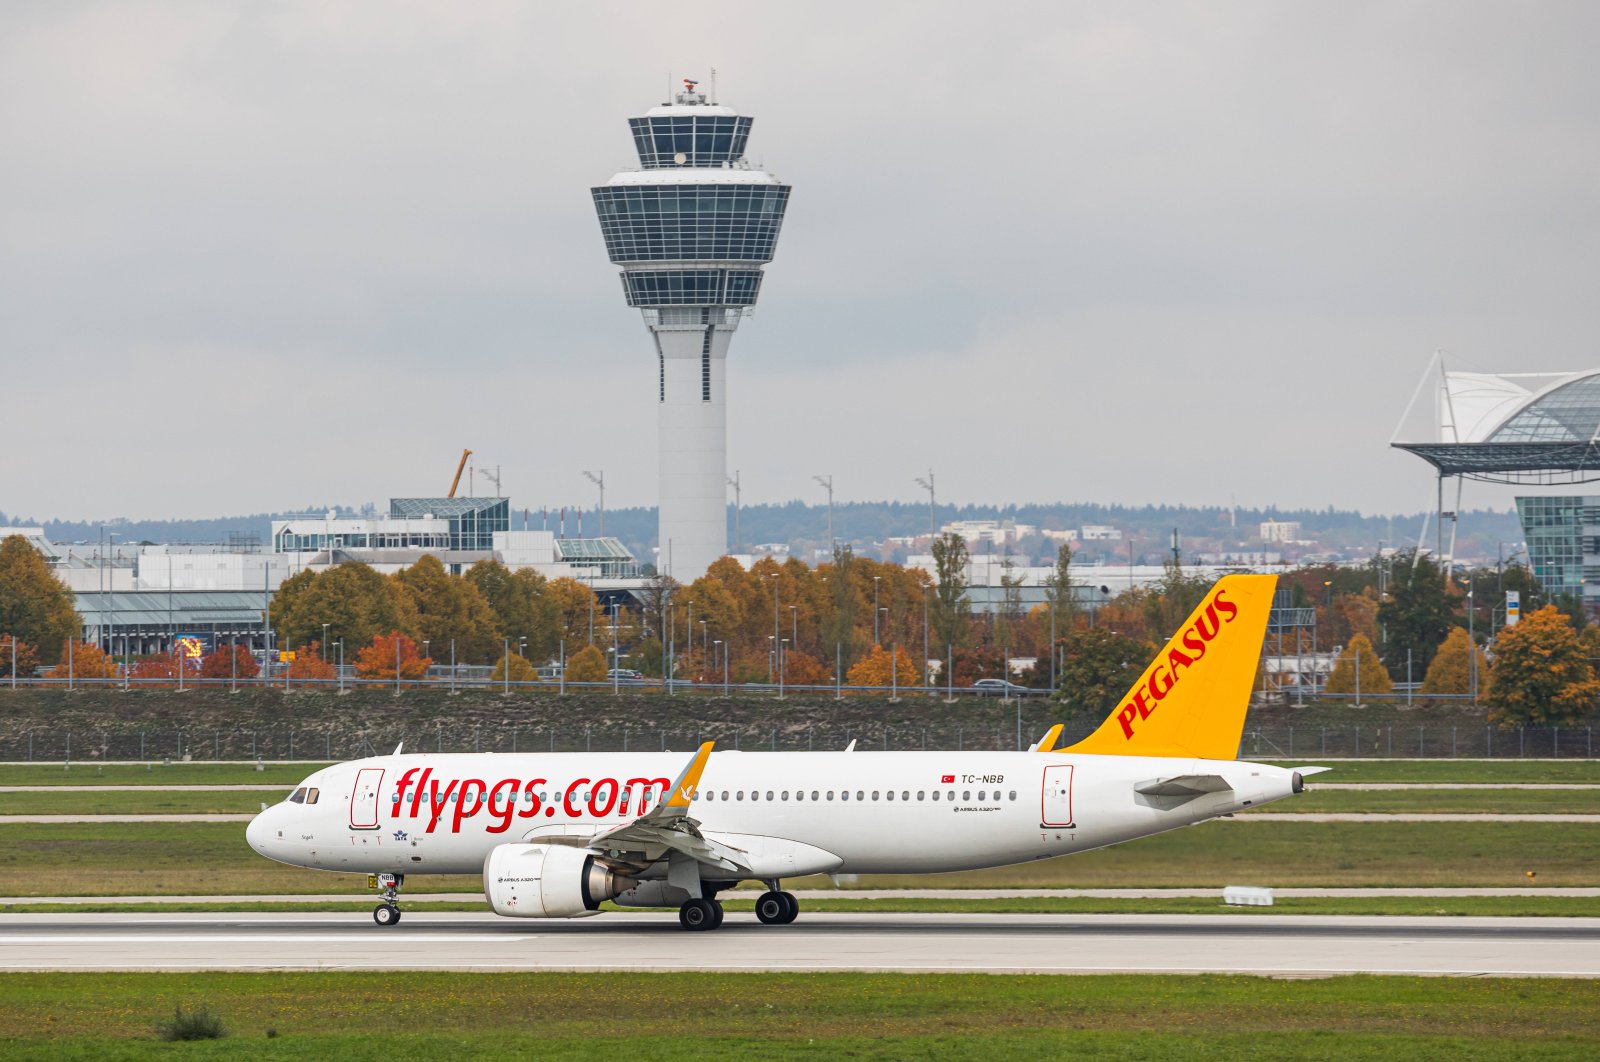 A Pegasus Airlines Airbus A320-251N aircraft lands at the airport in Munich, Germany, Oct. 11, 2022. (Reuters Photo)